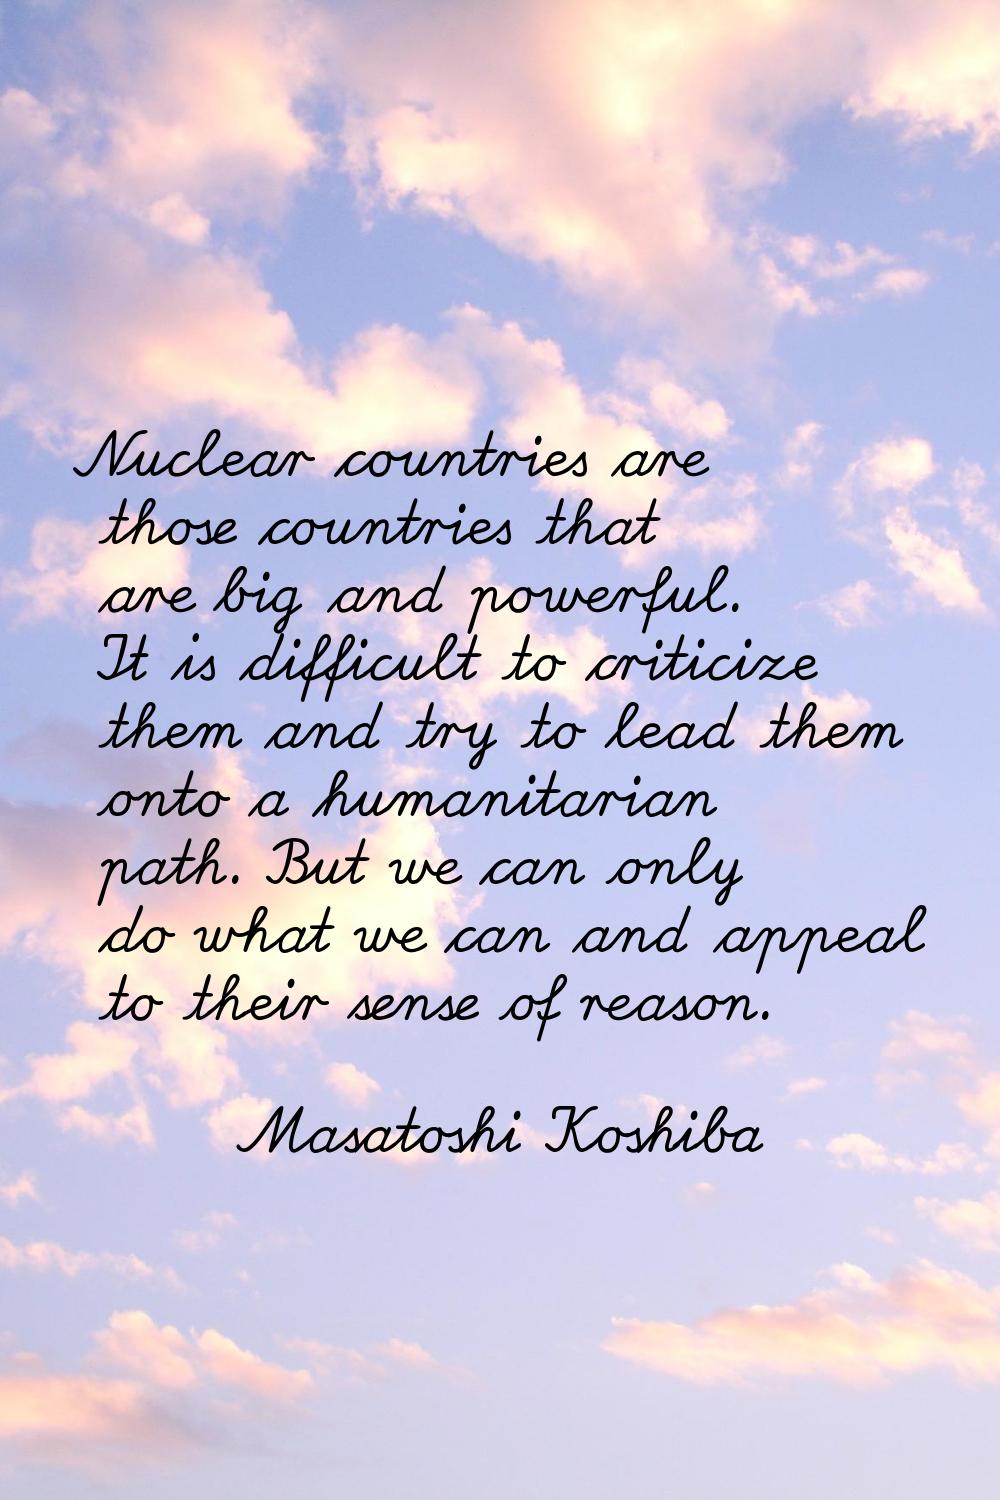 Nuclear countries are those countries that are big and powerful. It is difficult to criticize them 